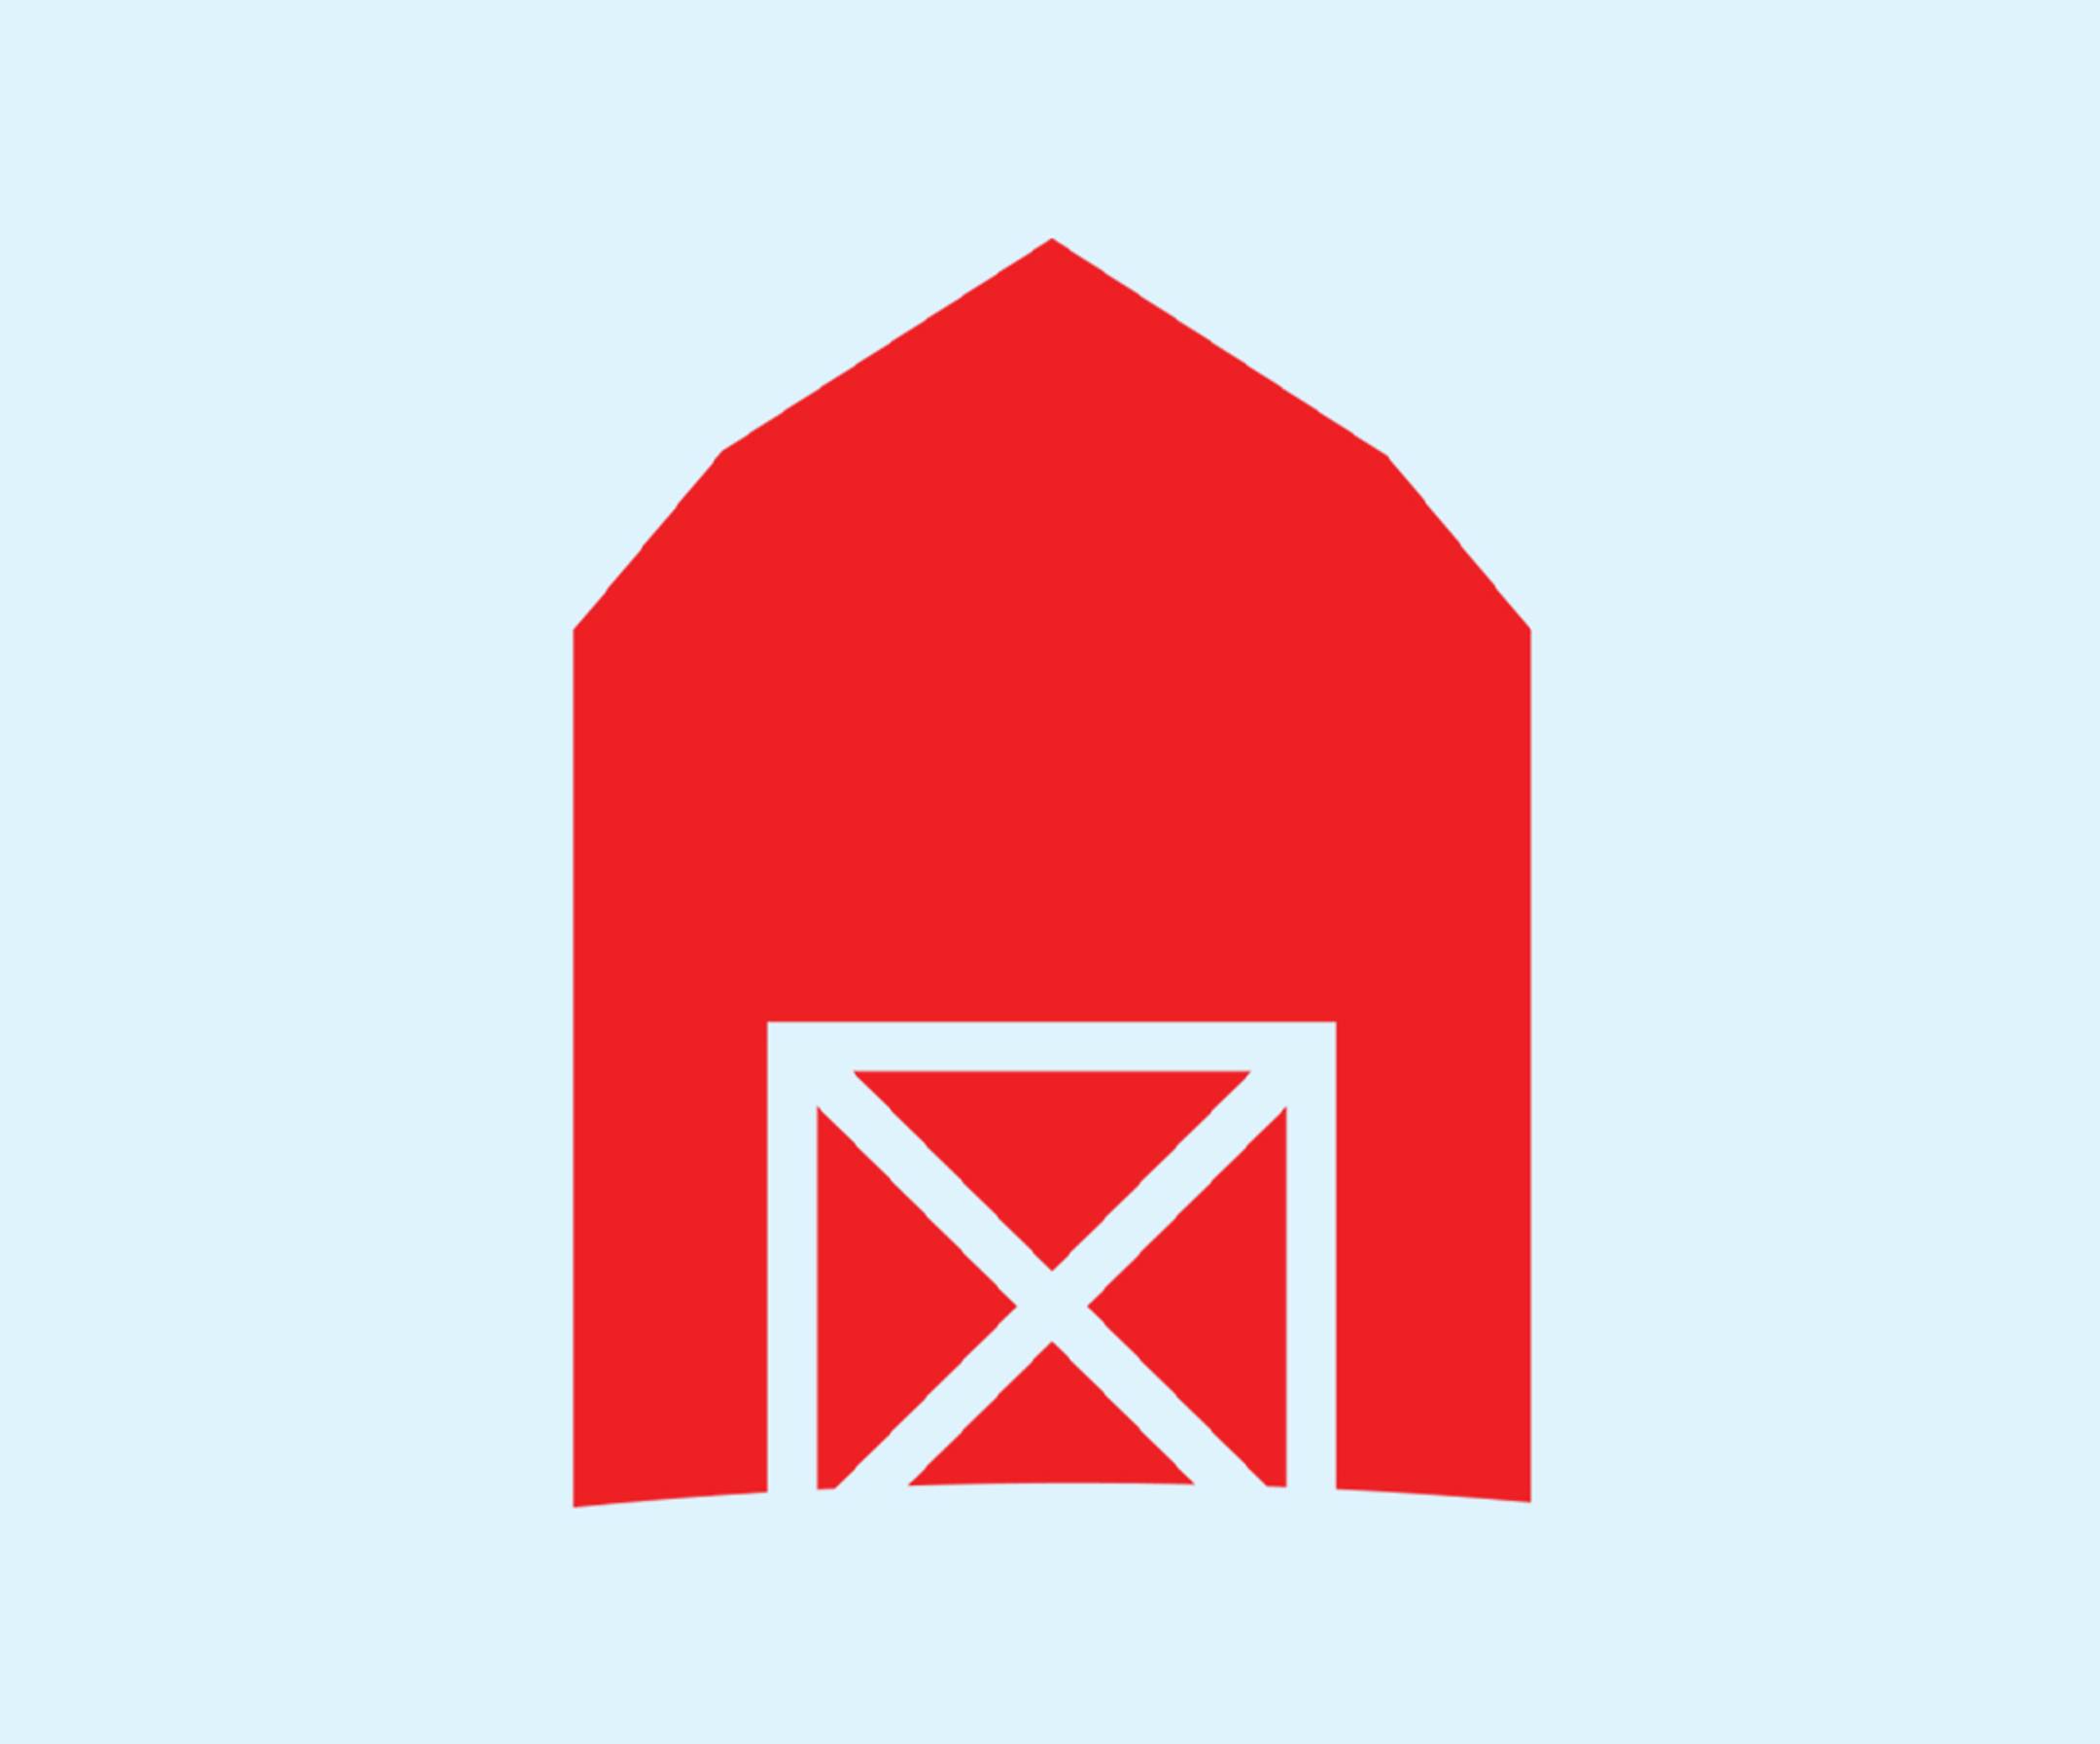 Illustration of the Once Upon a Farm barn that is used in logo